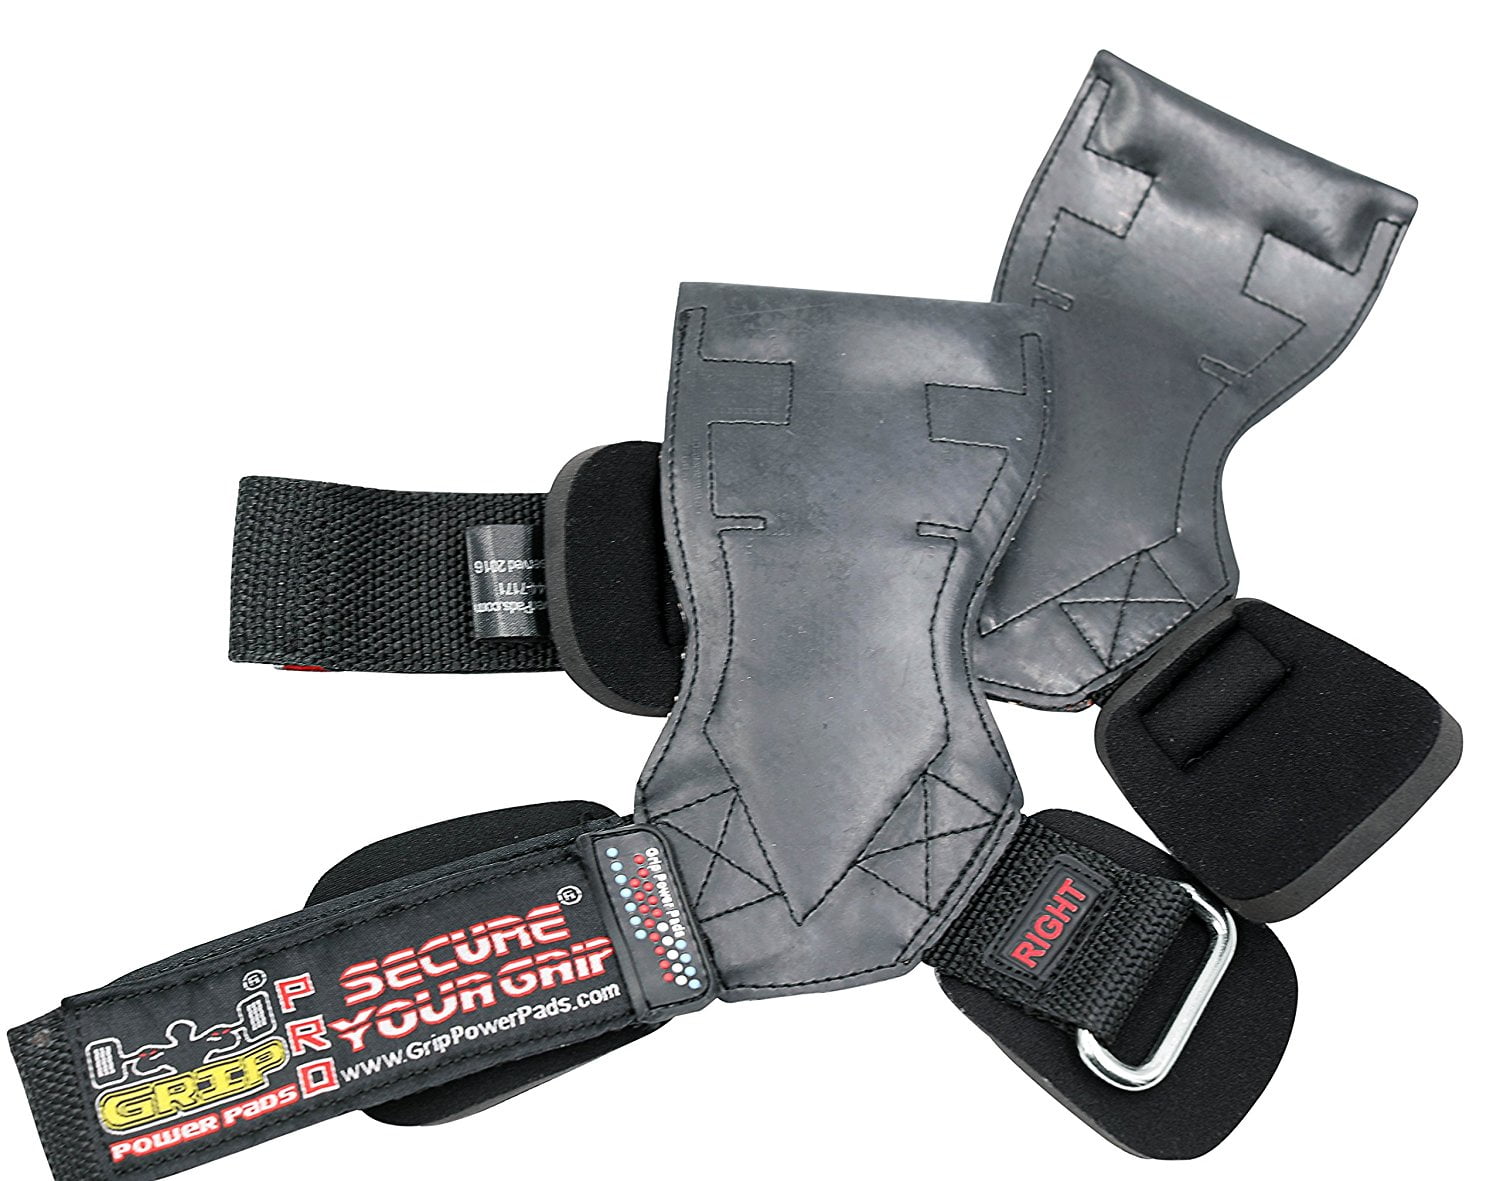 Grips PRO Gym Gloves Best Heavy Duty Straps for Dead-lifting Palm protector 